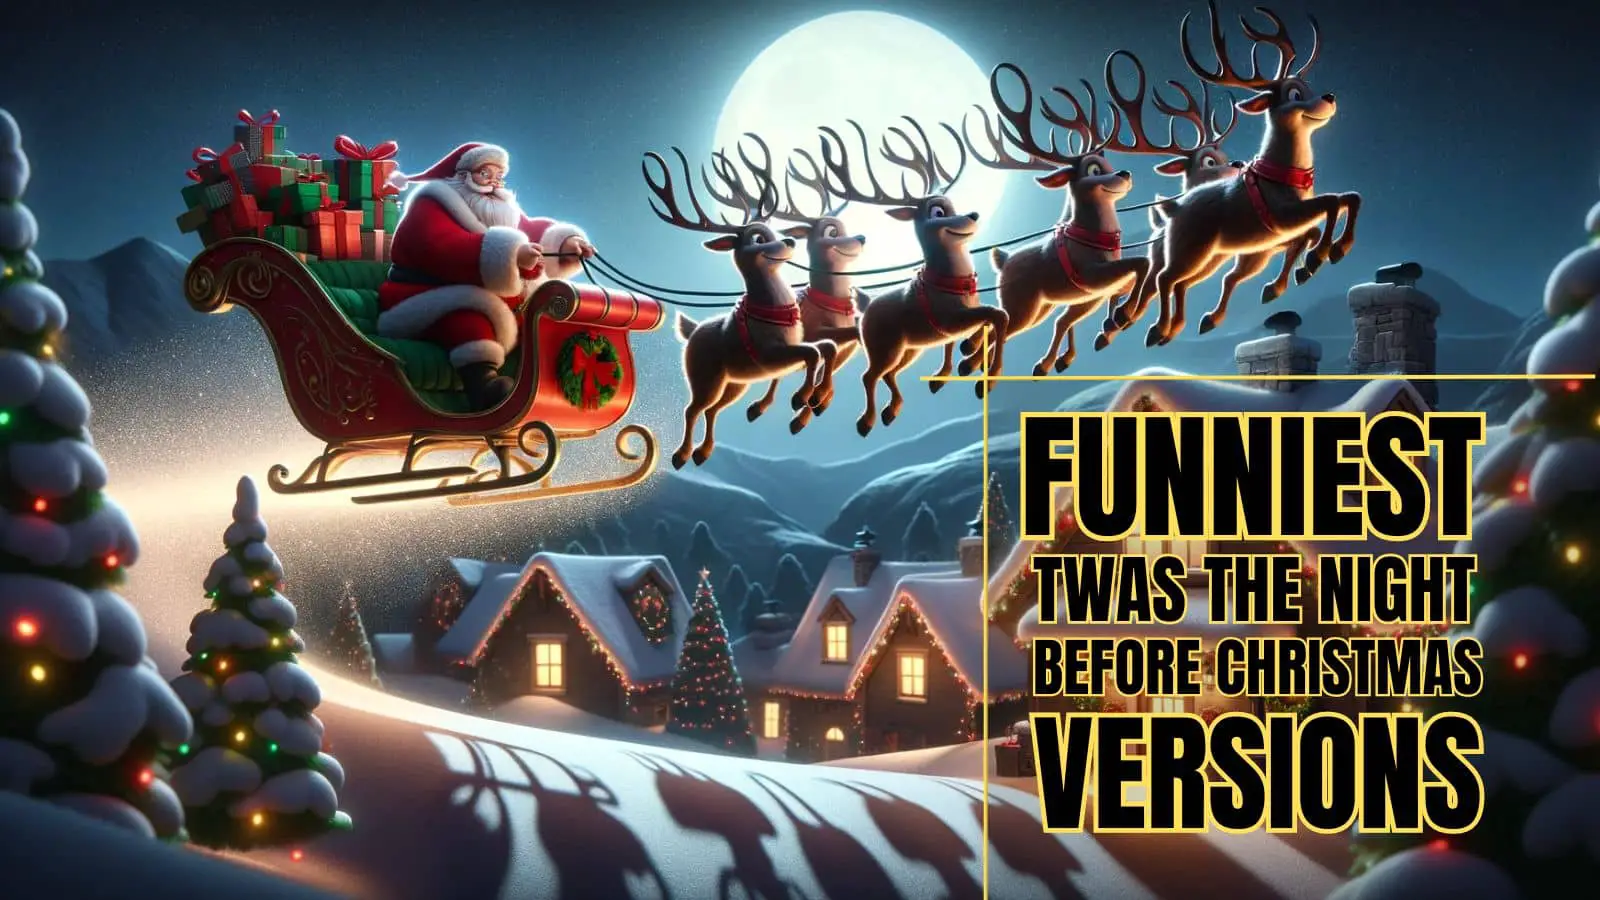 Funniest Twas the Night Before Christmas Versions